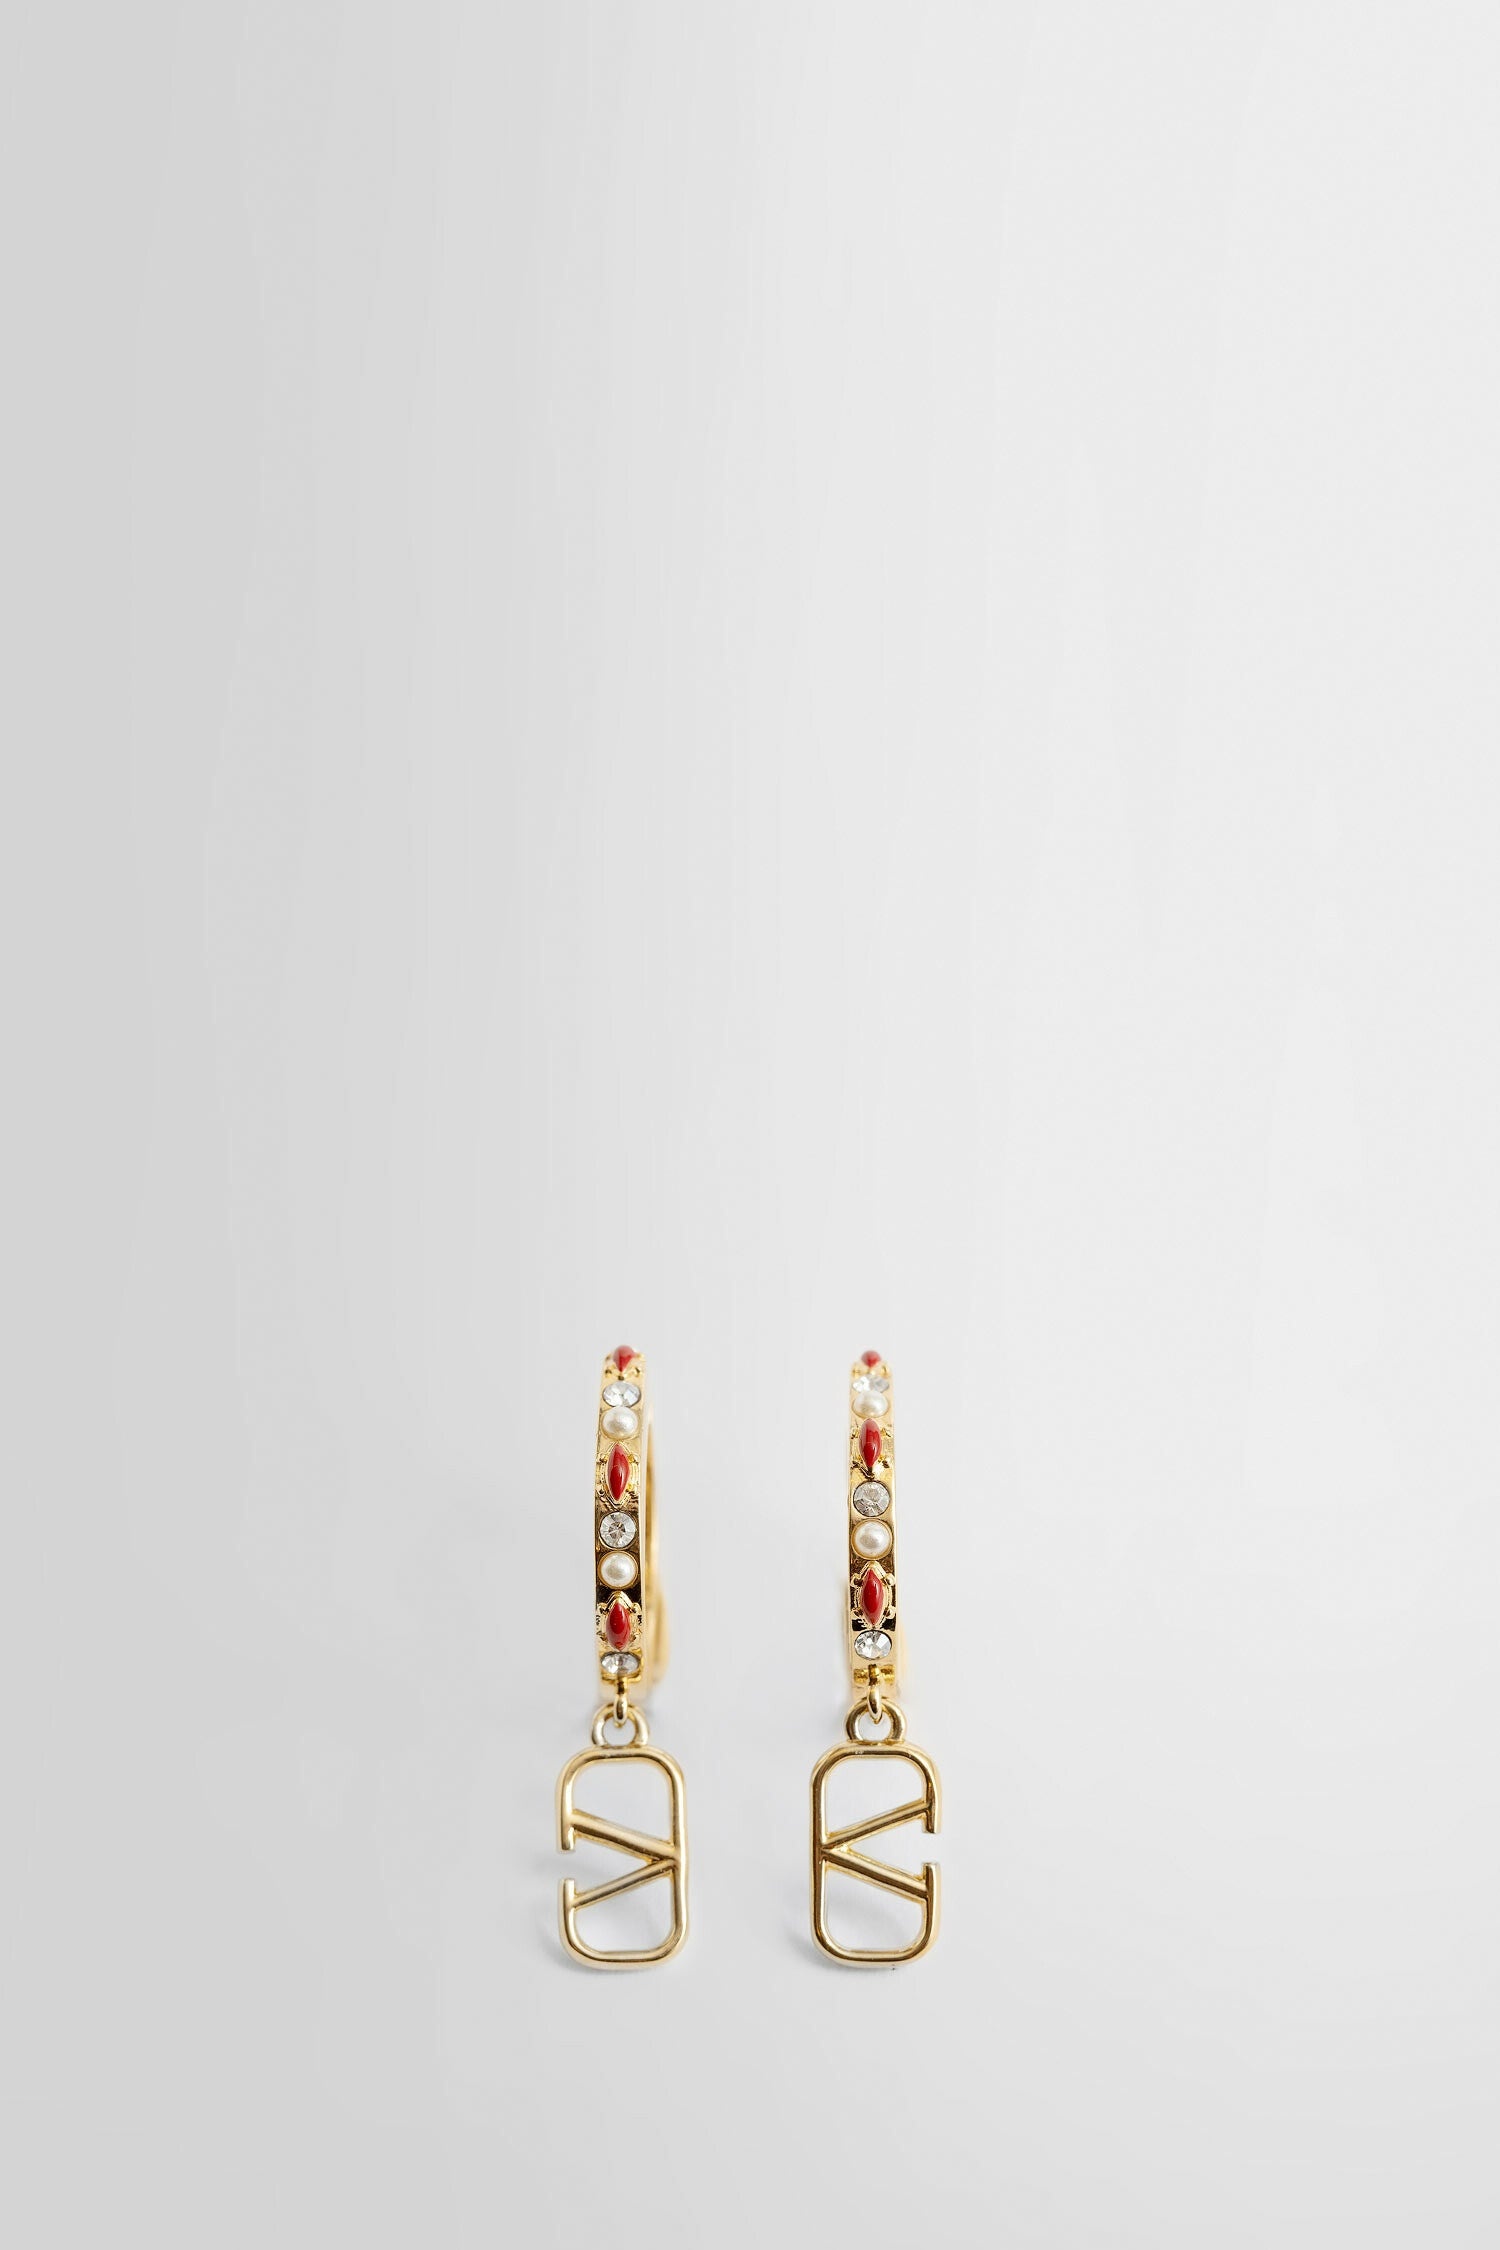 VALENTINO WOMAN GOLD EARRINGS - 1